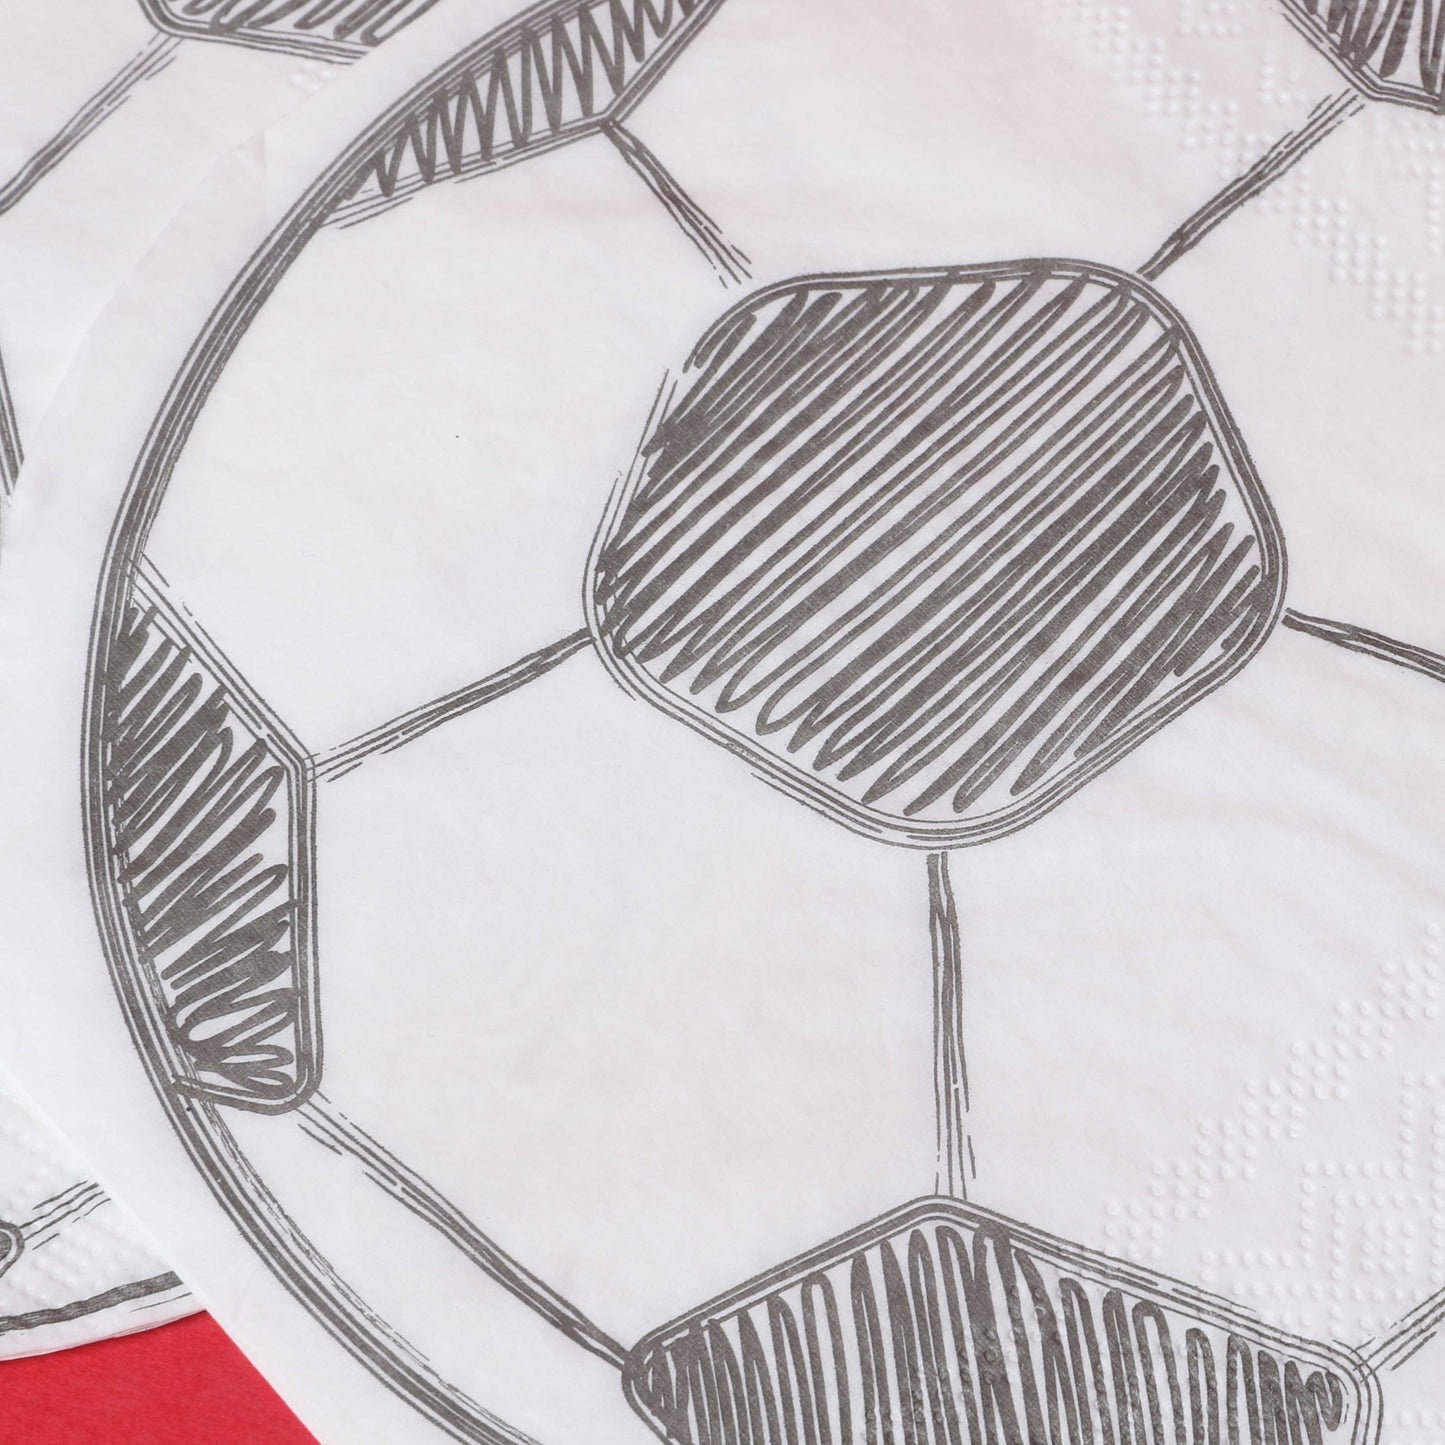 Round Football Shape and Design Paper Napkins Pack of 20